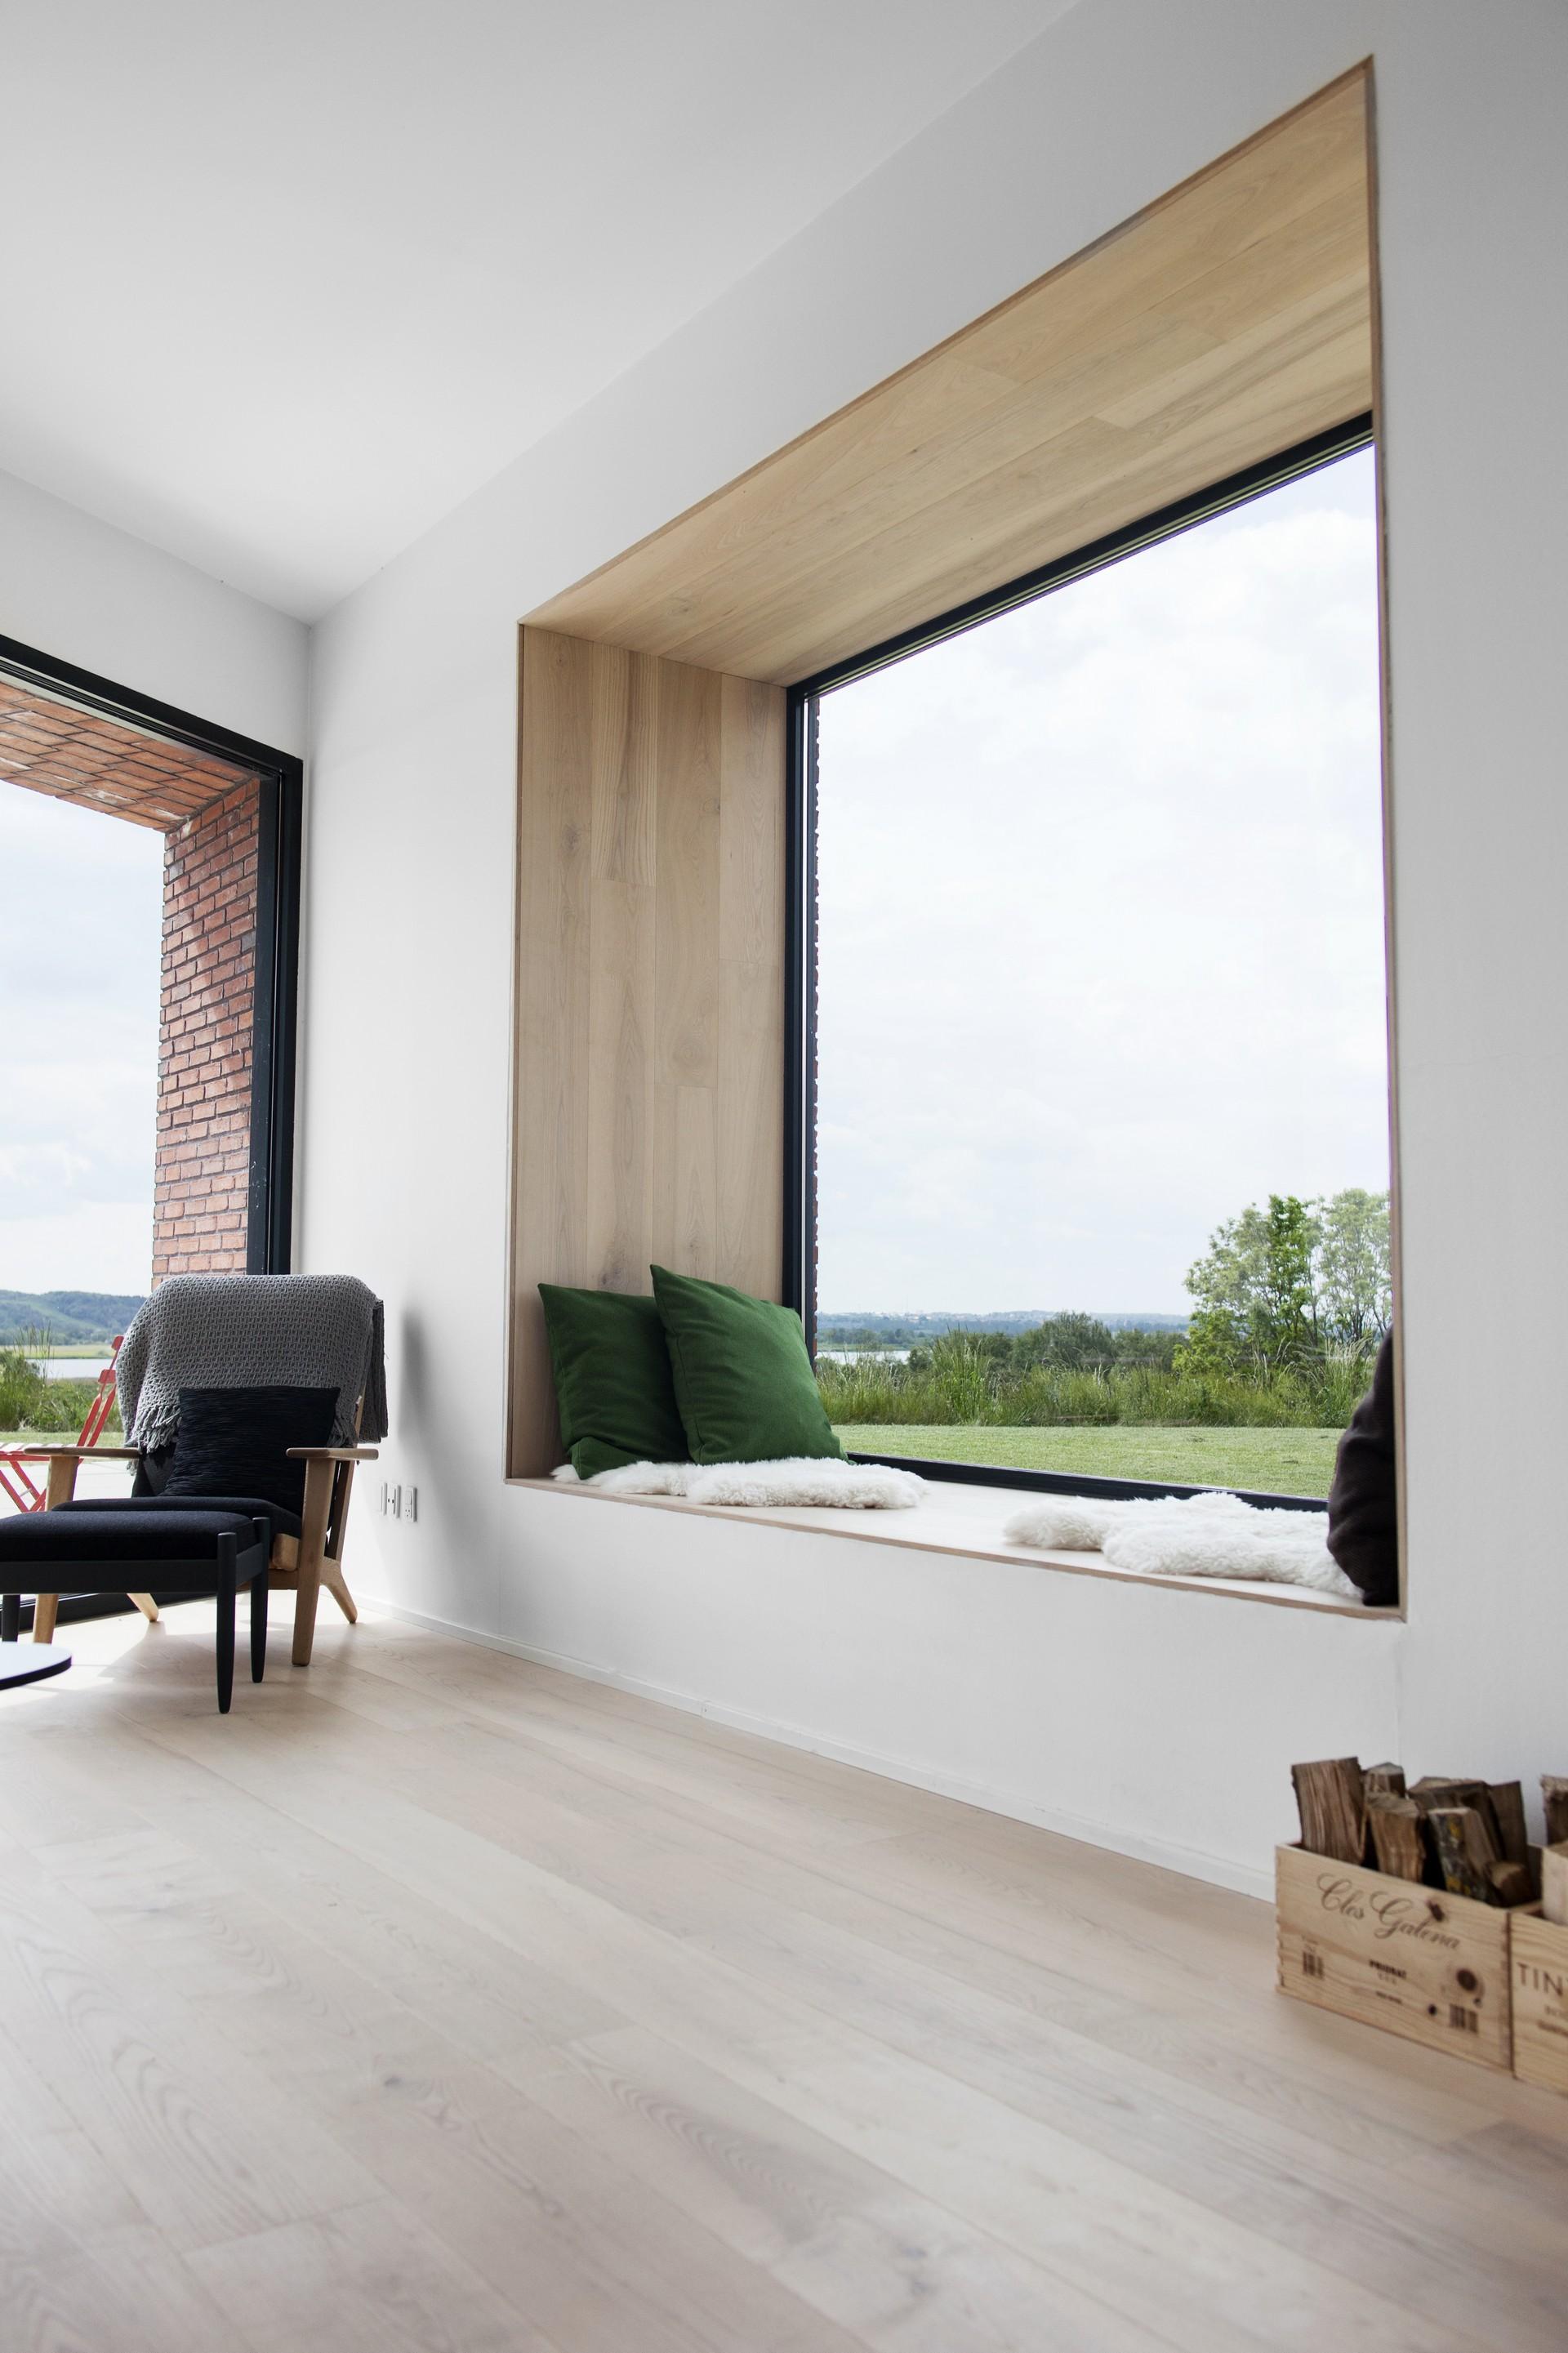 Project by Krads and photos by Runolfur Geir Guobjornsson big window making the space feel larger